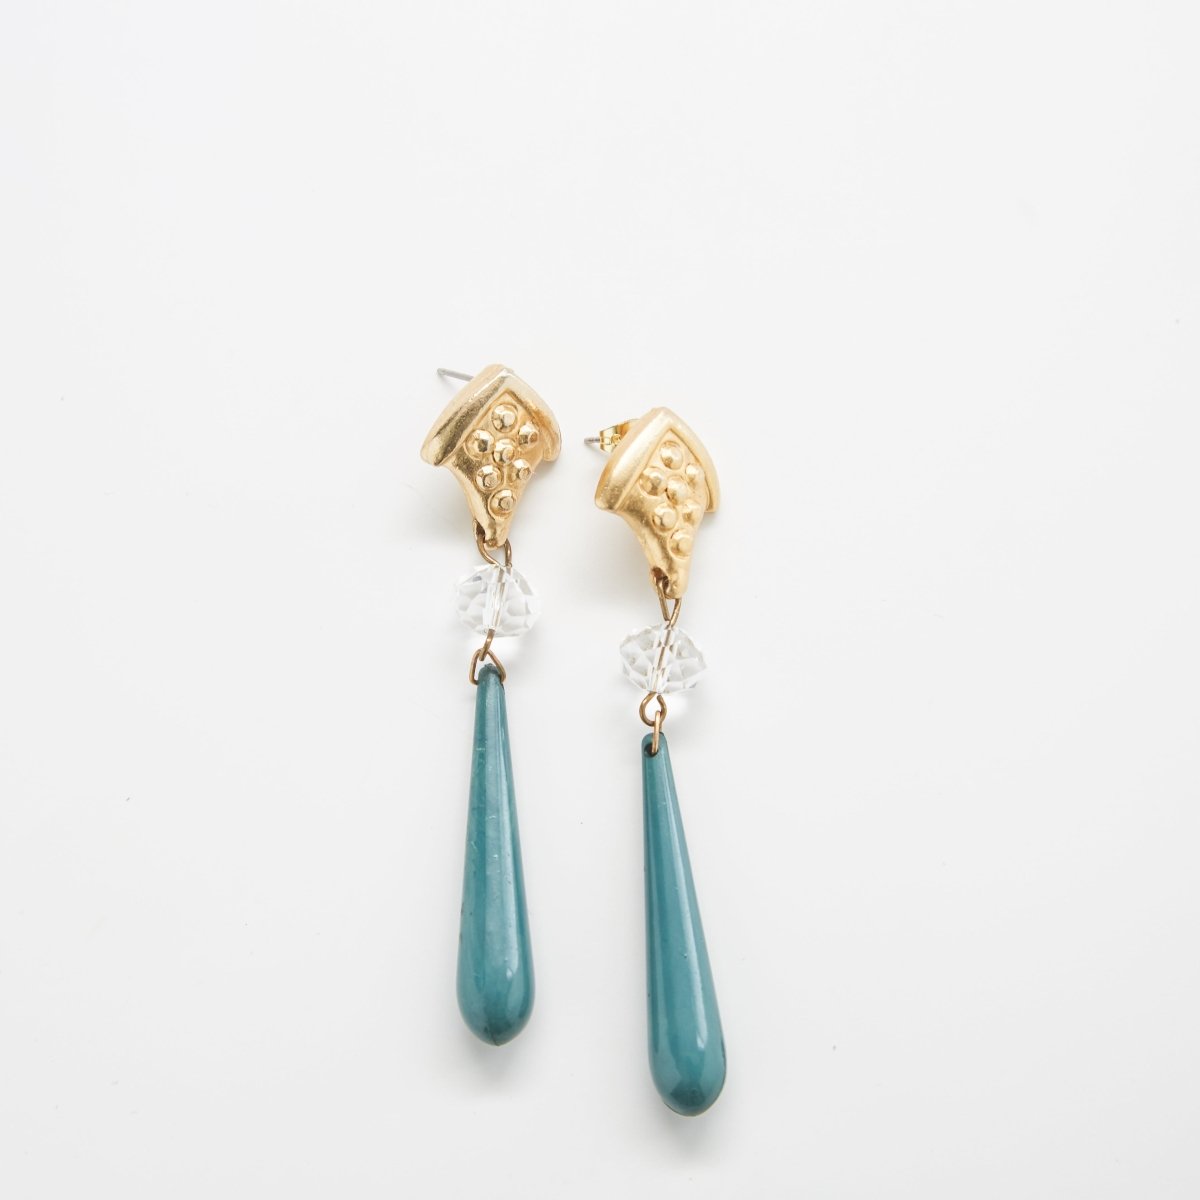 Vintage Green and Gold Dangle Earrings - Admiral Row